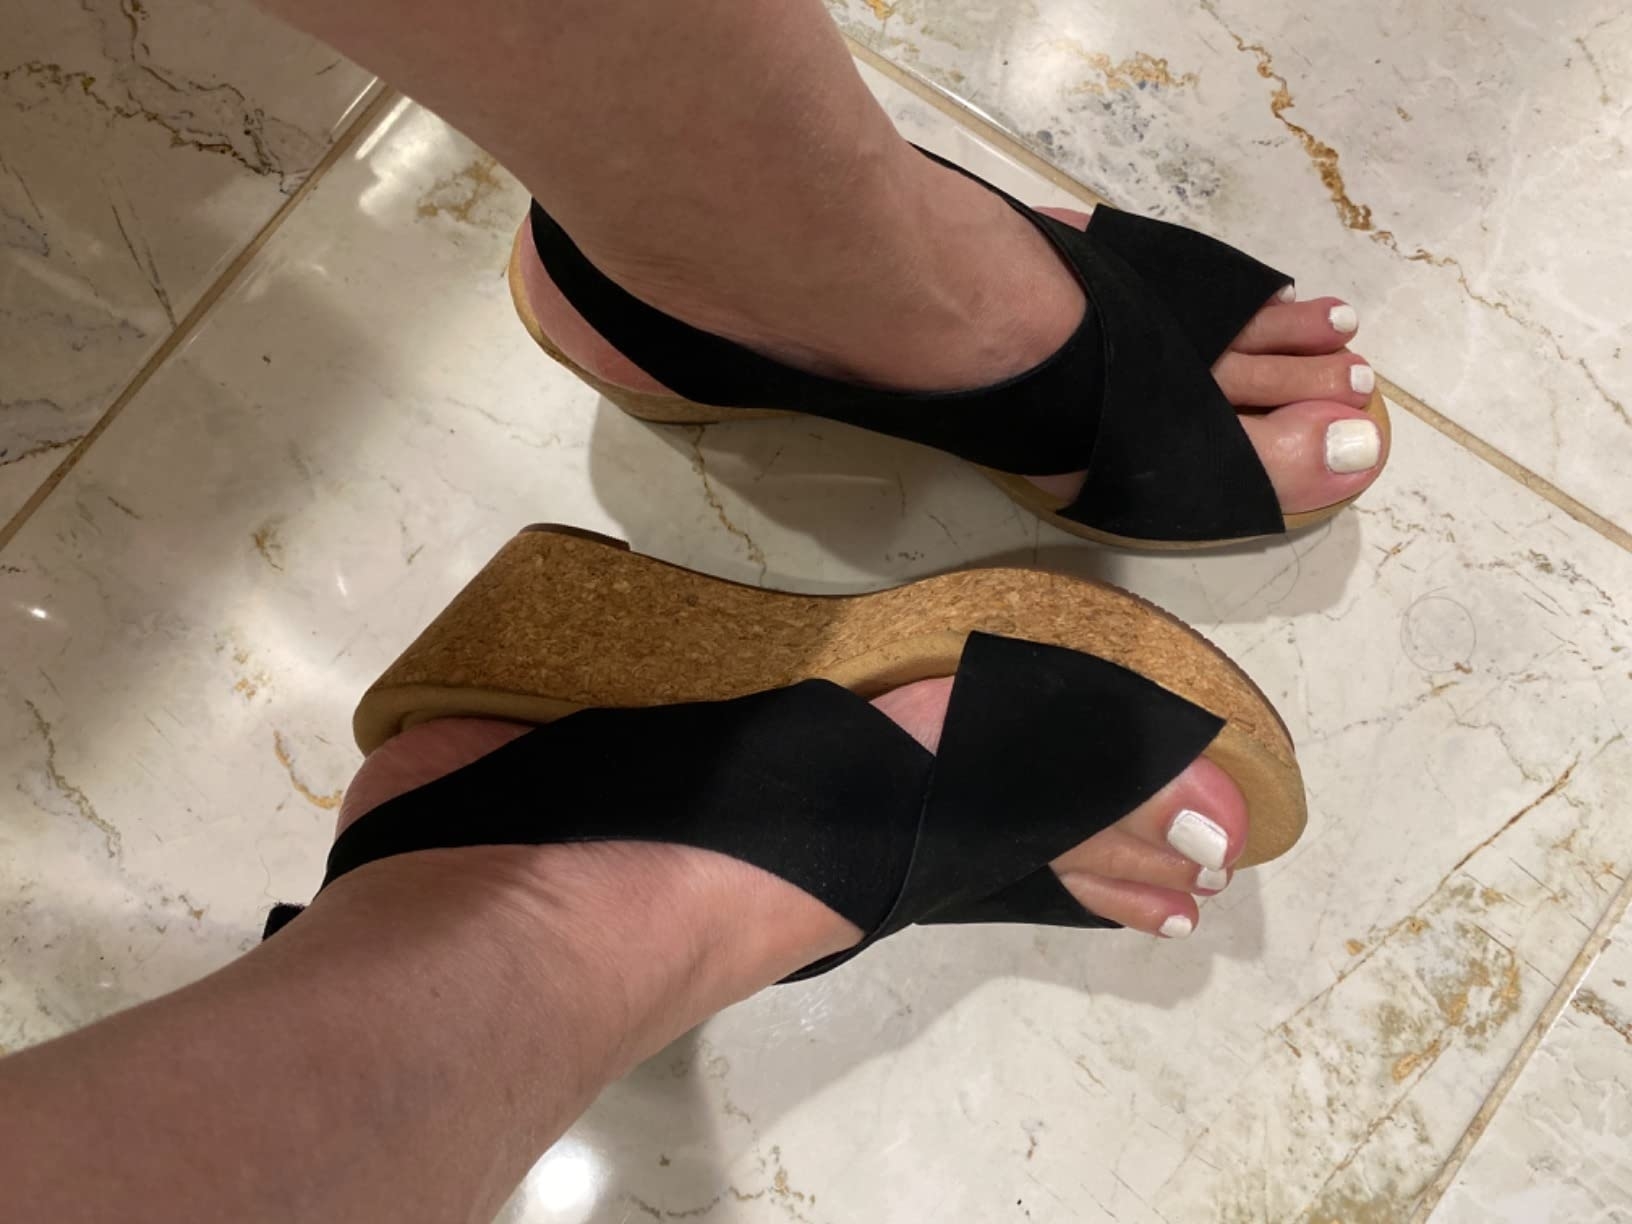 Person wearing platform sandals, with a close view of the feet